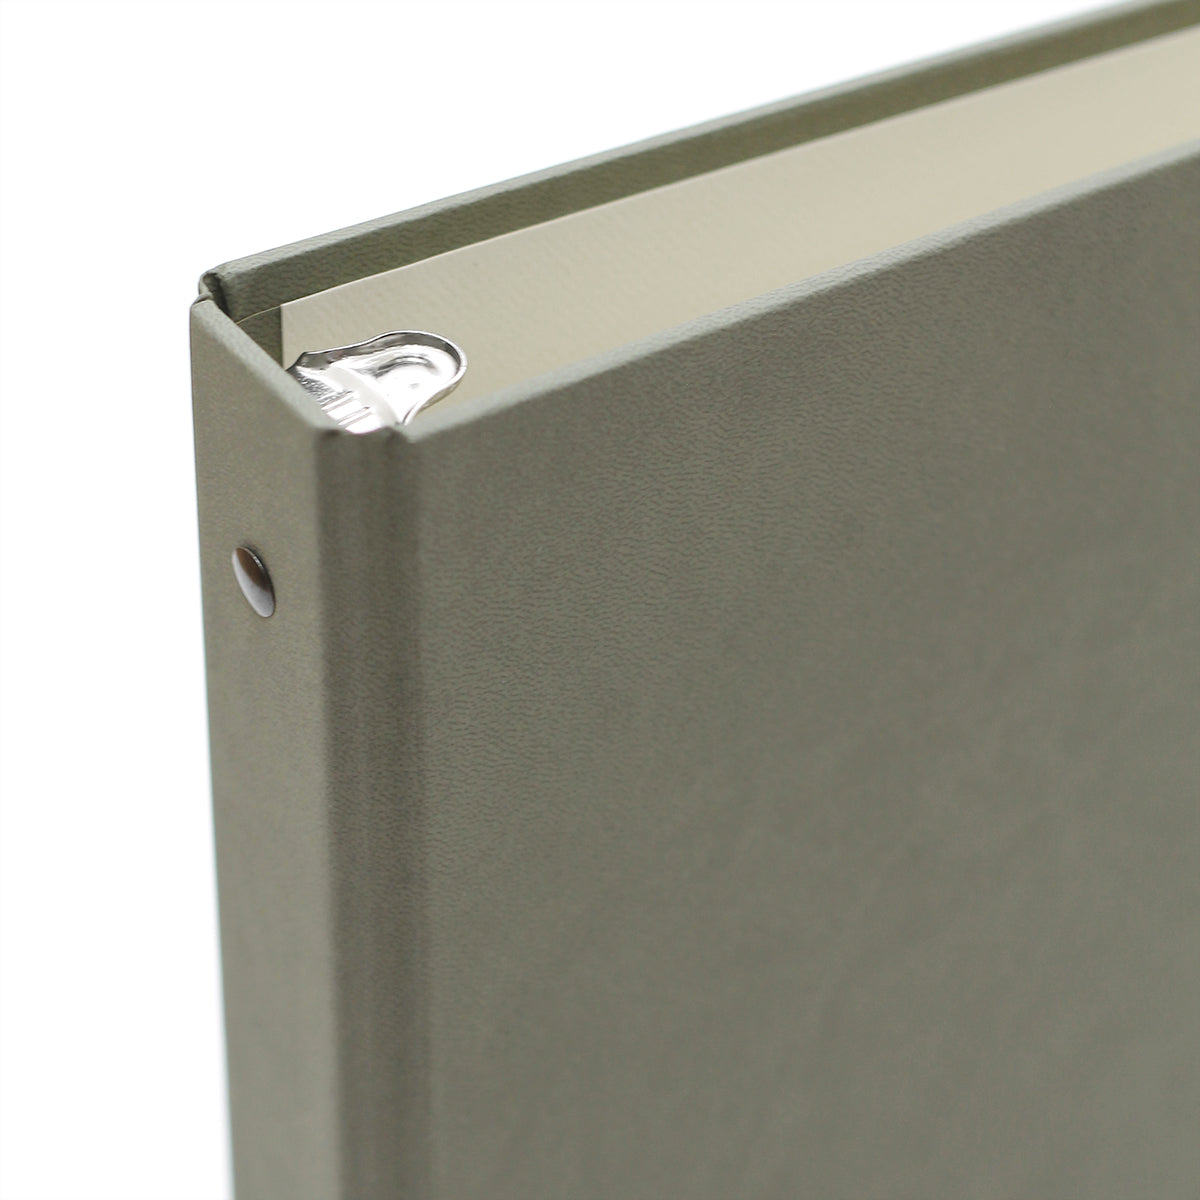 Storage Binder for Photos or Documents with Moss Vegan Leather Cover